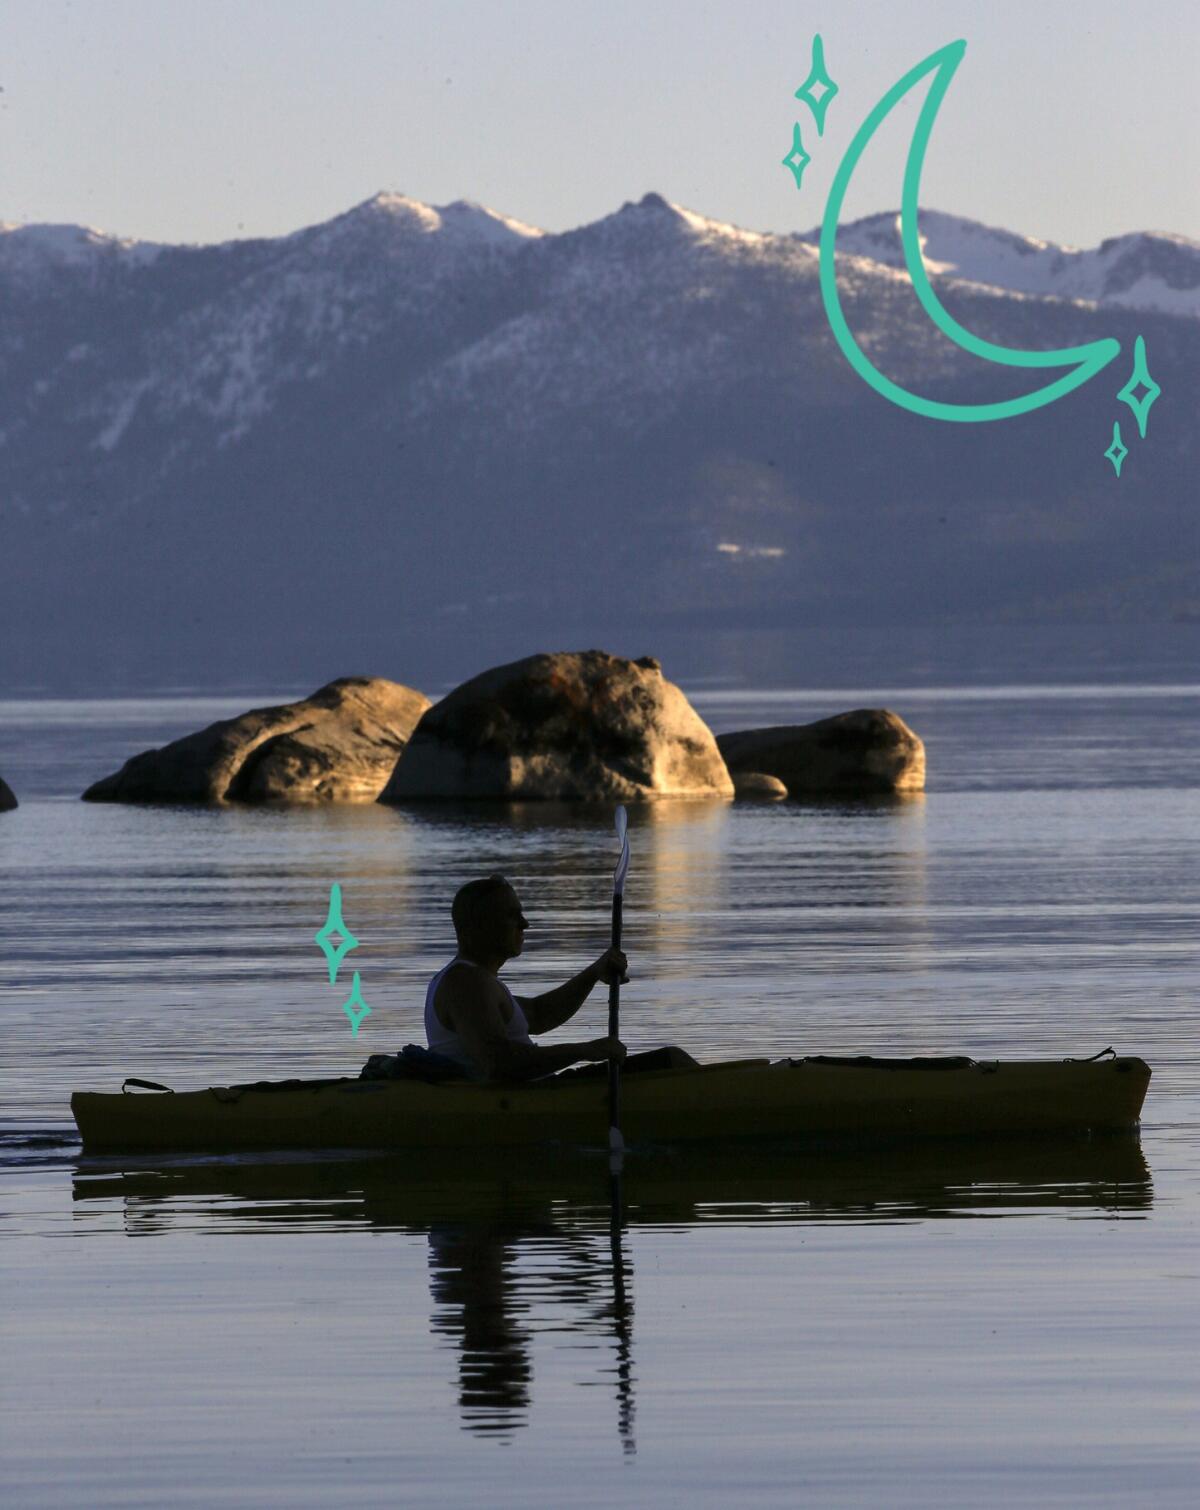 A photo illustration of a kayak and kayaker on the water.